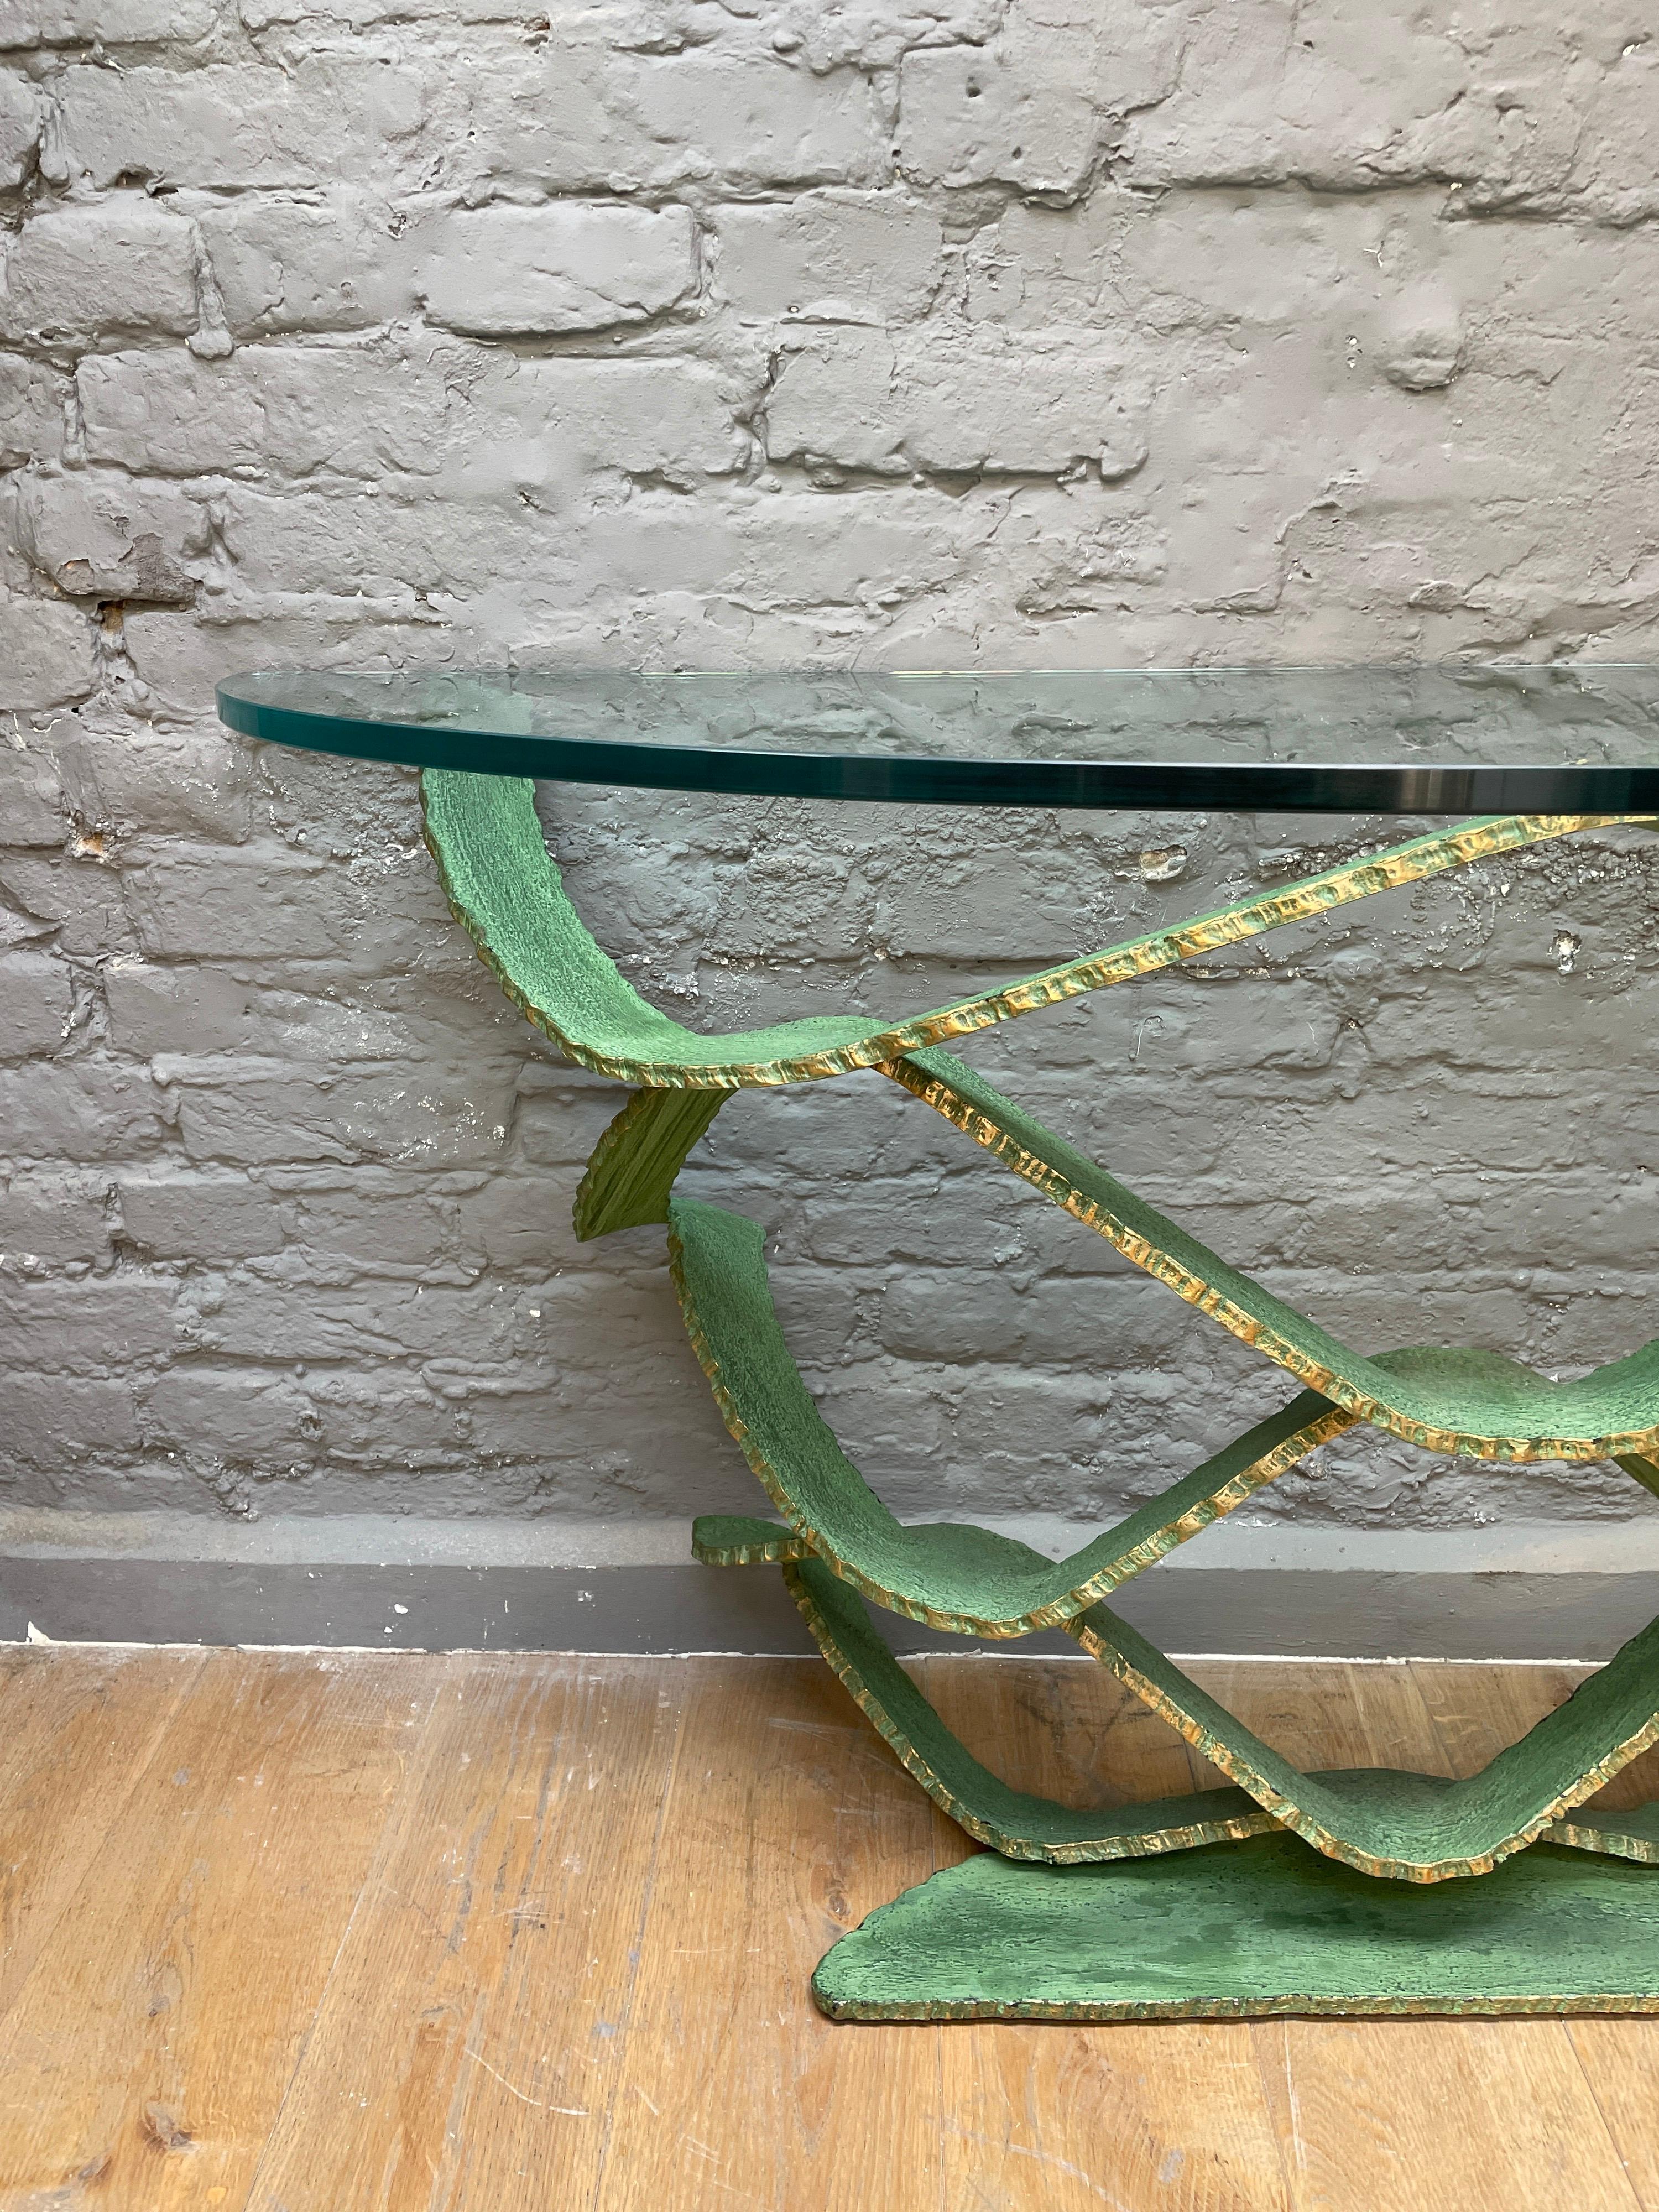 Designed by Maurice Barlione for Reflex Italy, Circa 1980. Finished in Verdigris and gold gilt, with a thick glass plate top.